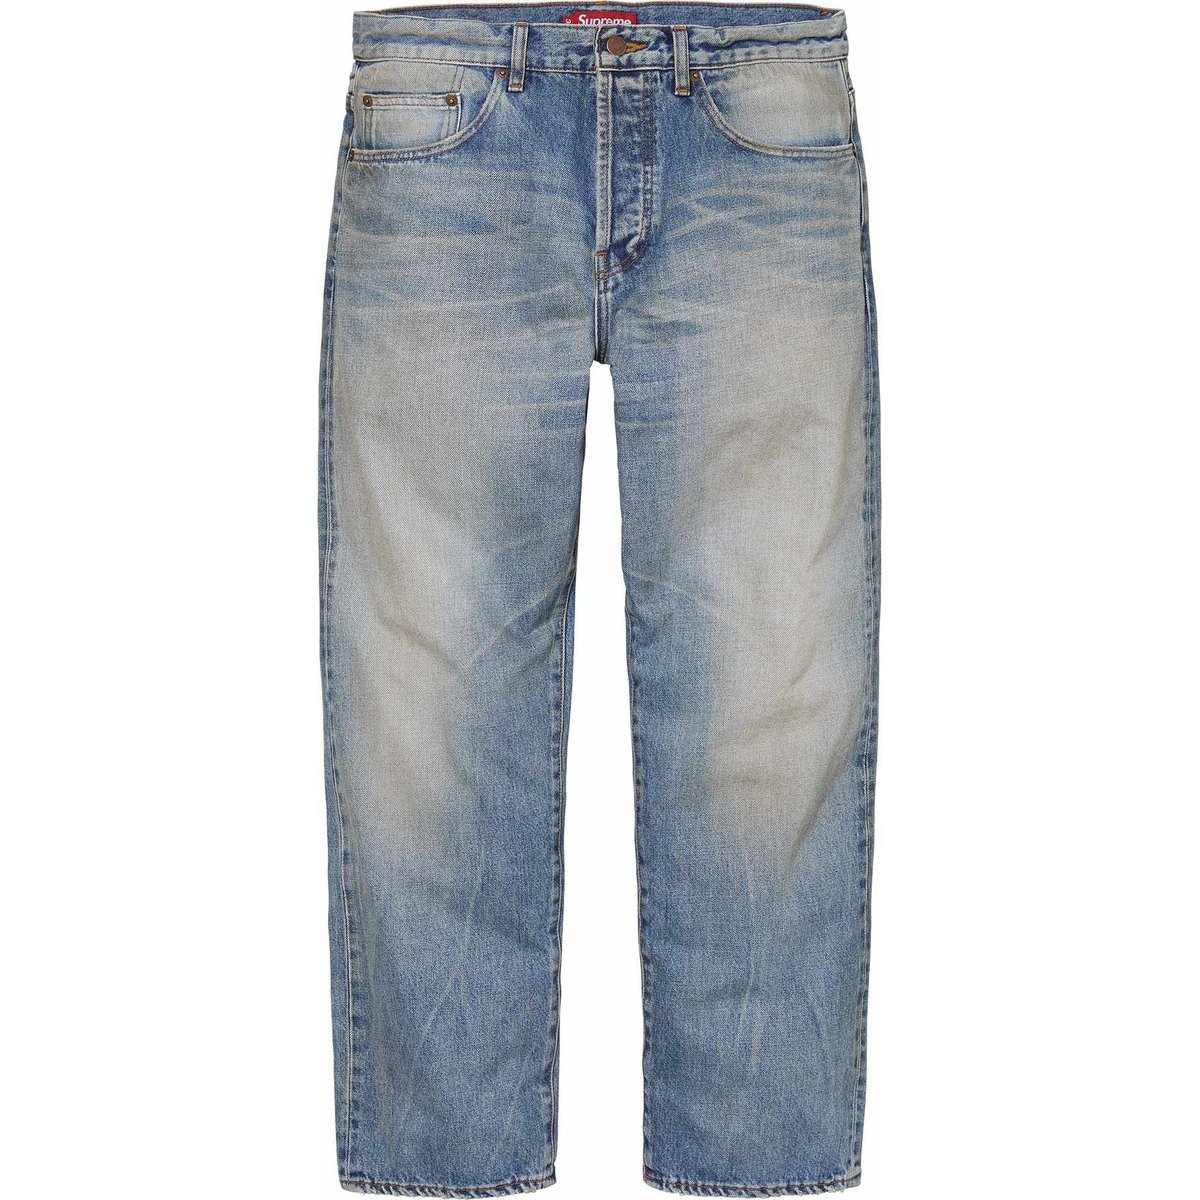 Supreme Distressed Loose Fit Selvedge Jean released during spring summer 24 season